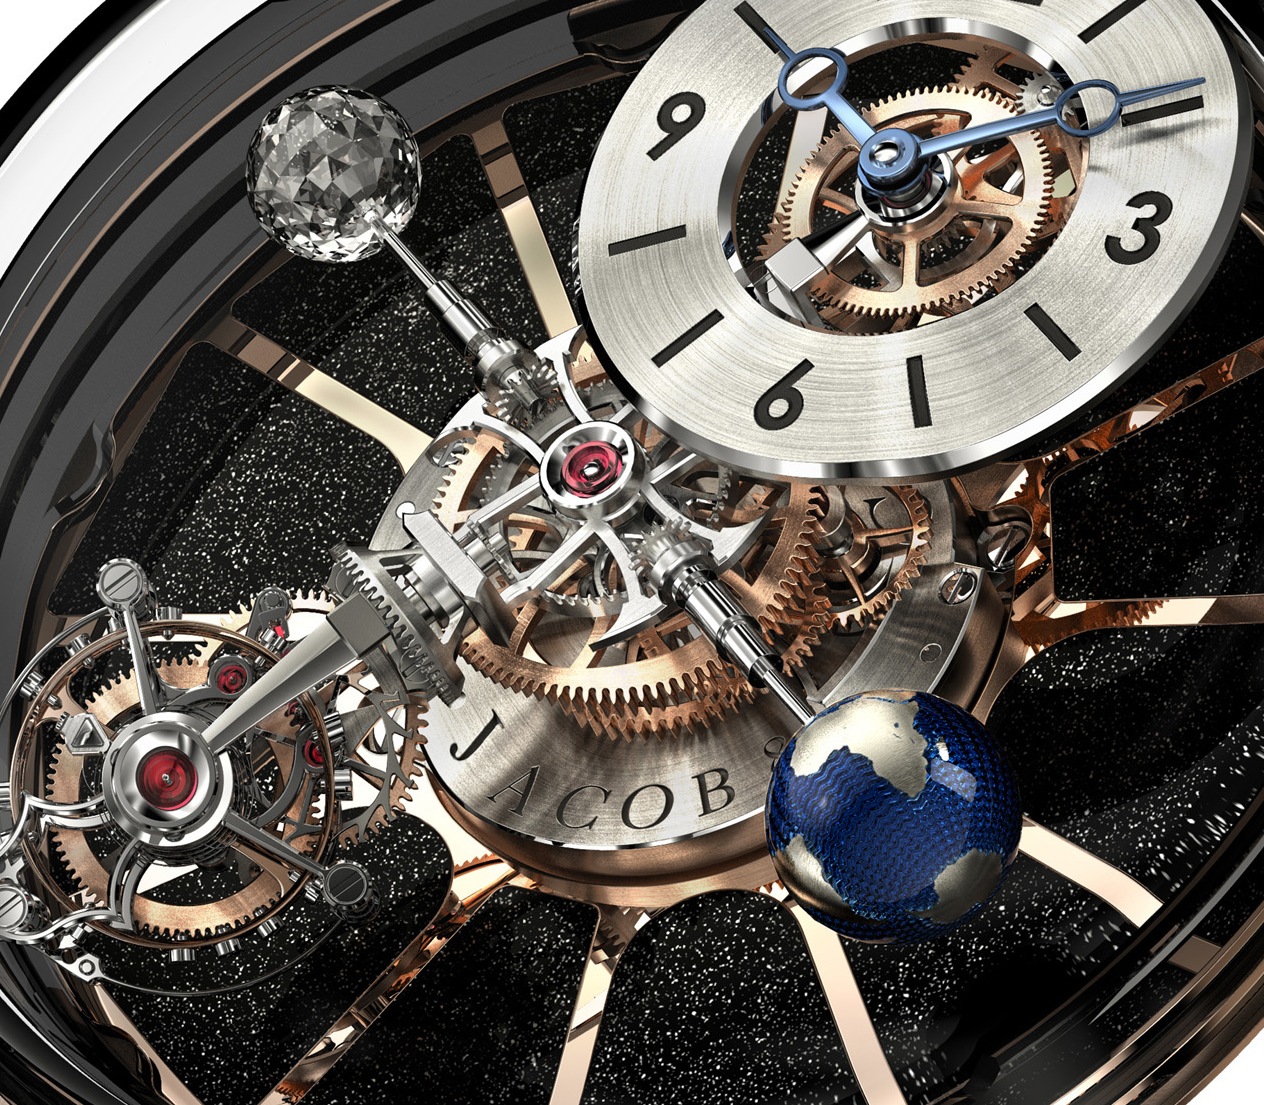 The watch features four axes, each holding a differrentfeature, including the time, tourbillon, moon and earth renditions.